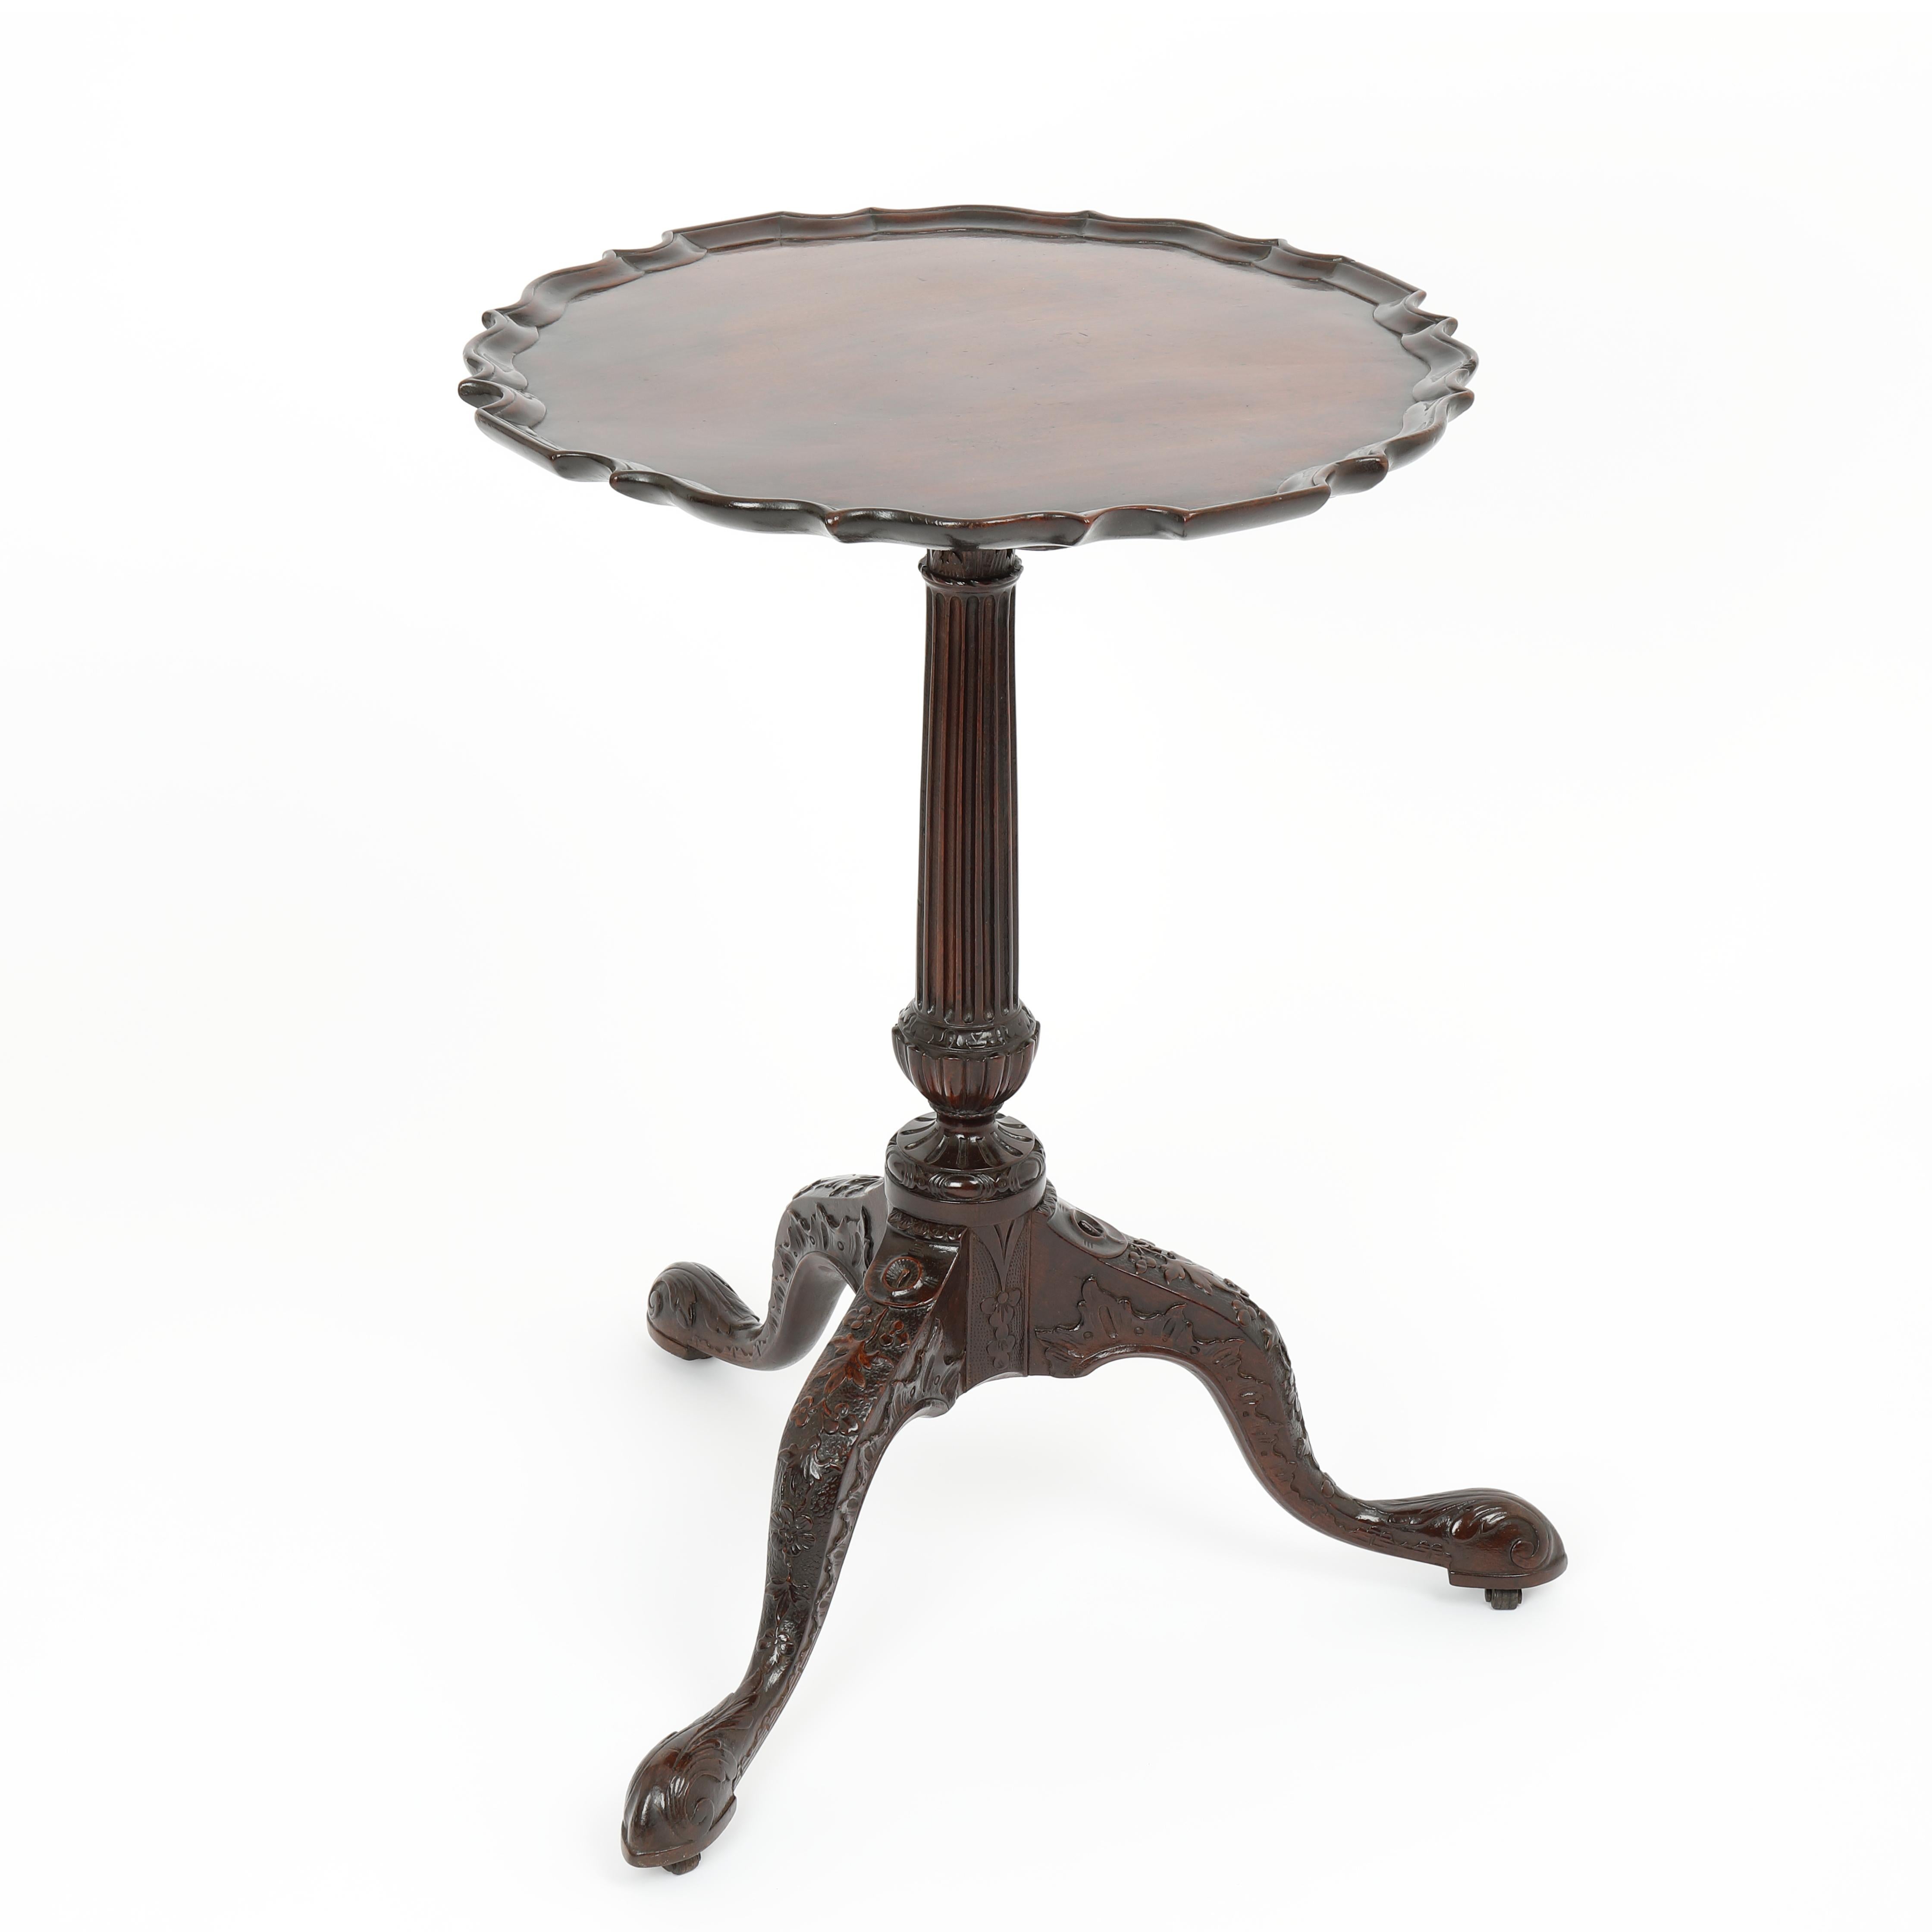 Chippendale Period Mahogany 'Pie-Crust' Tripod Table For Sale 8